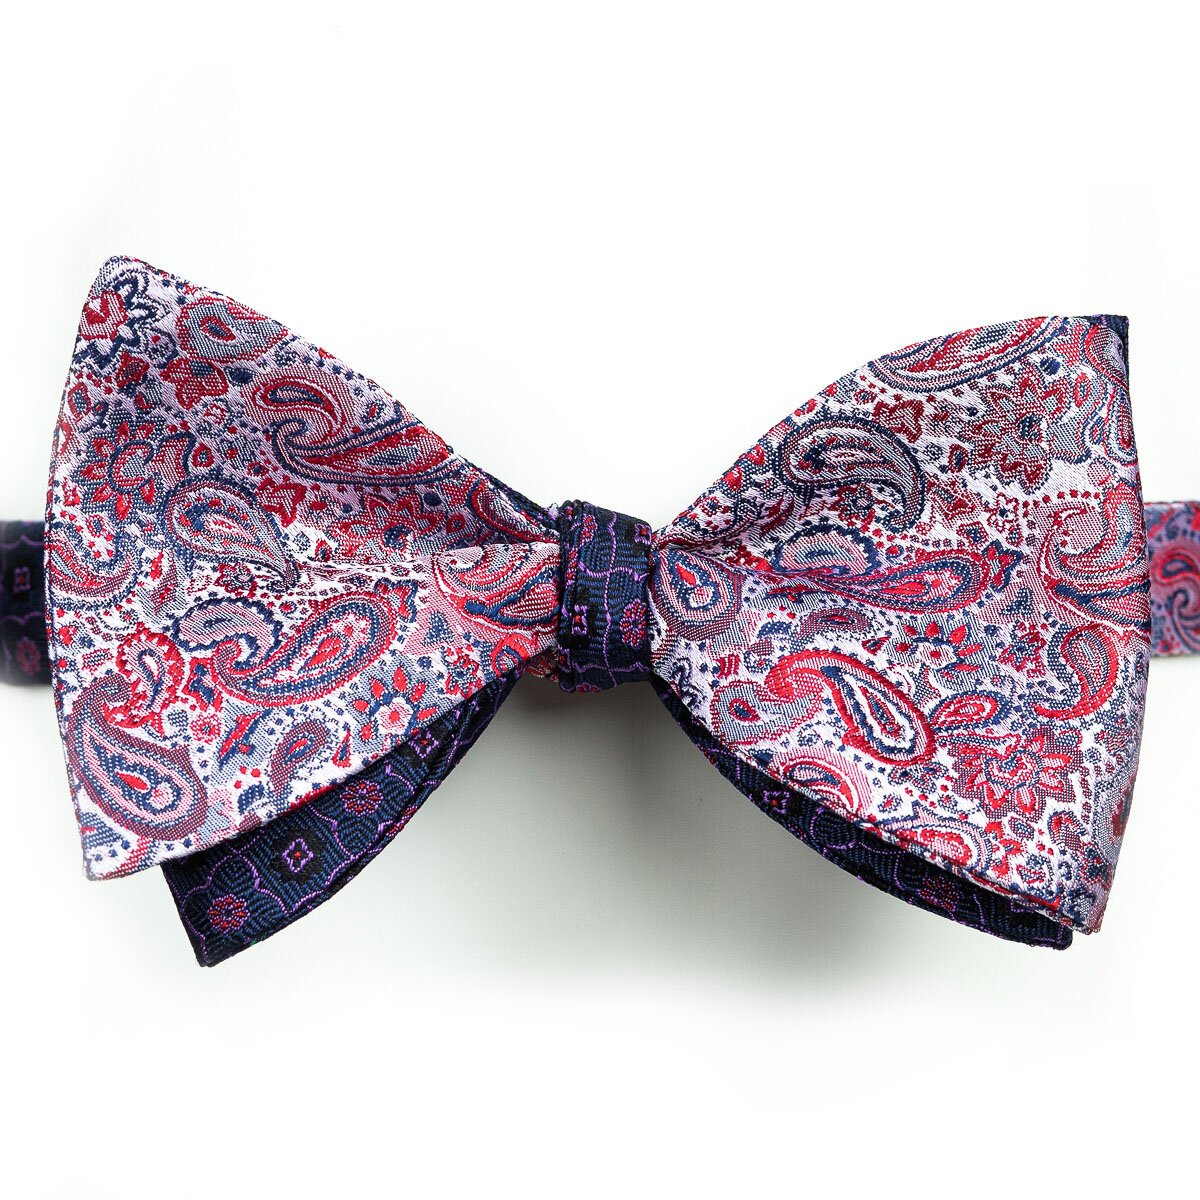 Self tie bow ties: Elevate Your Style with Elegance缩略图